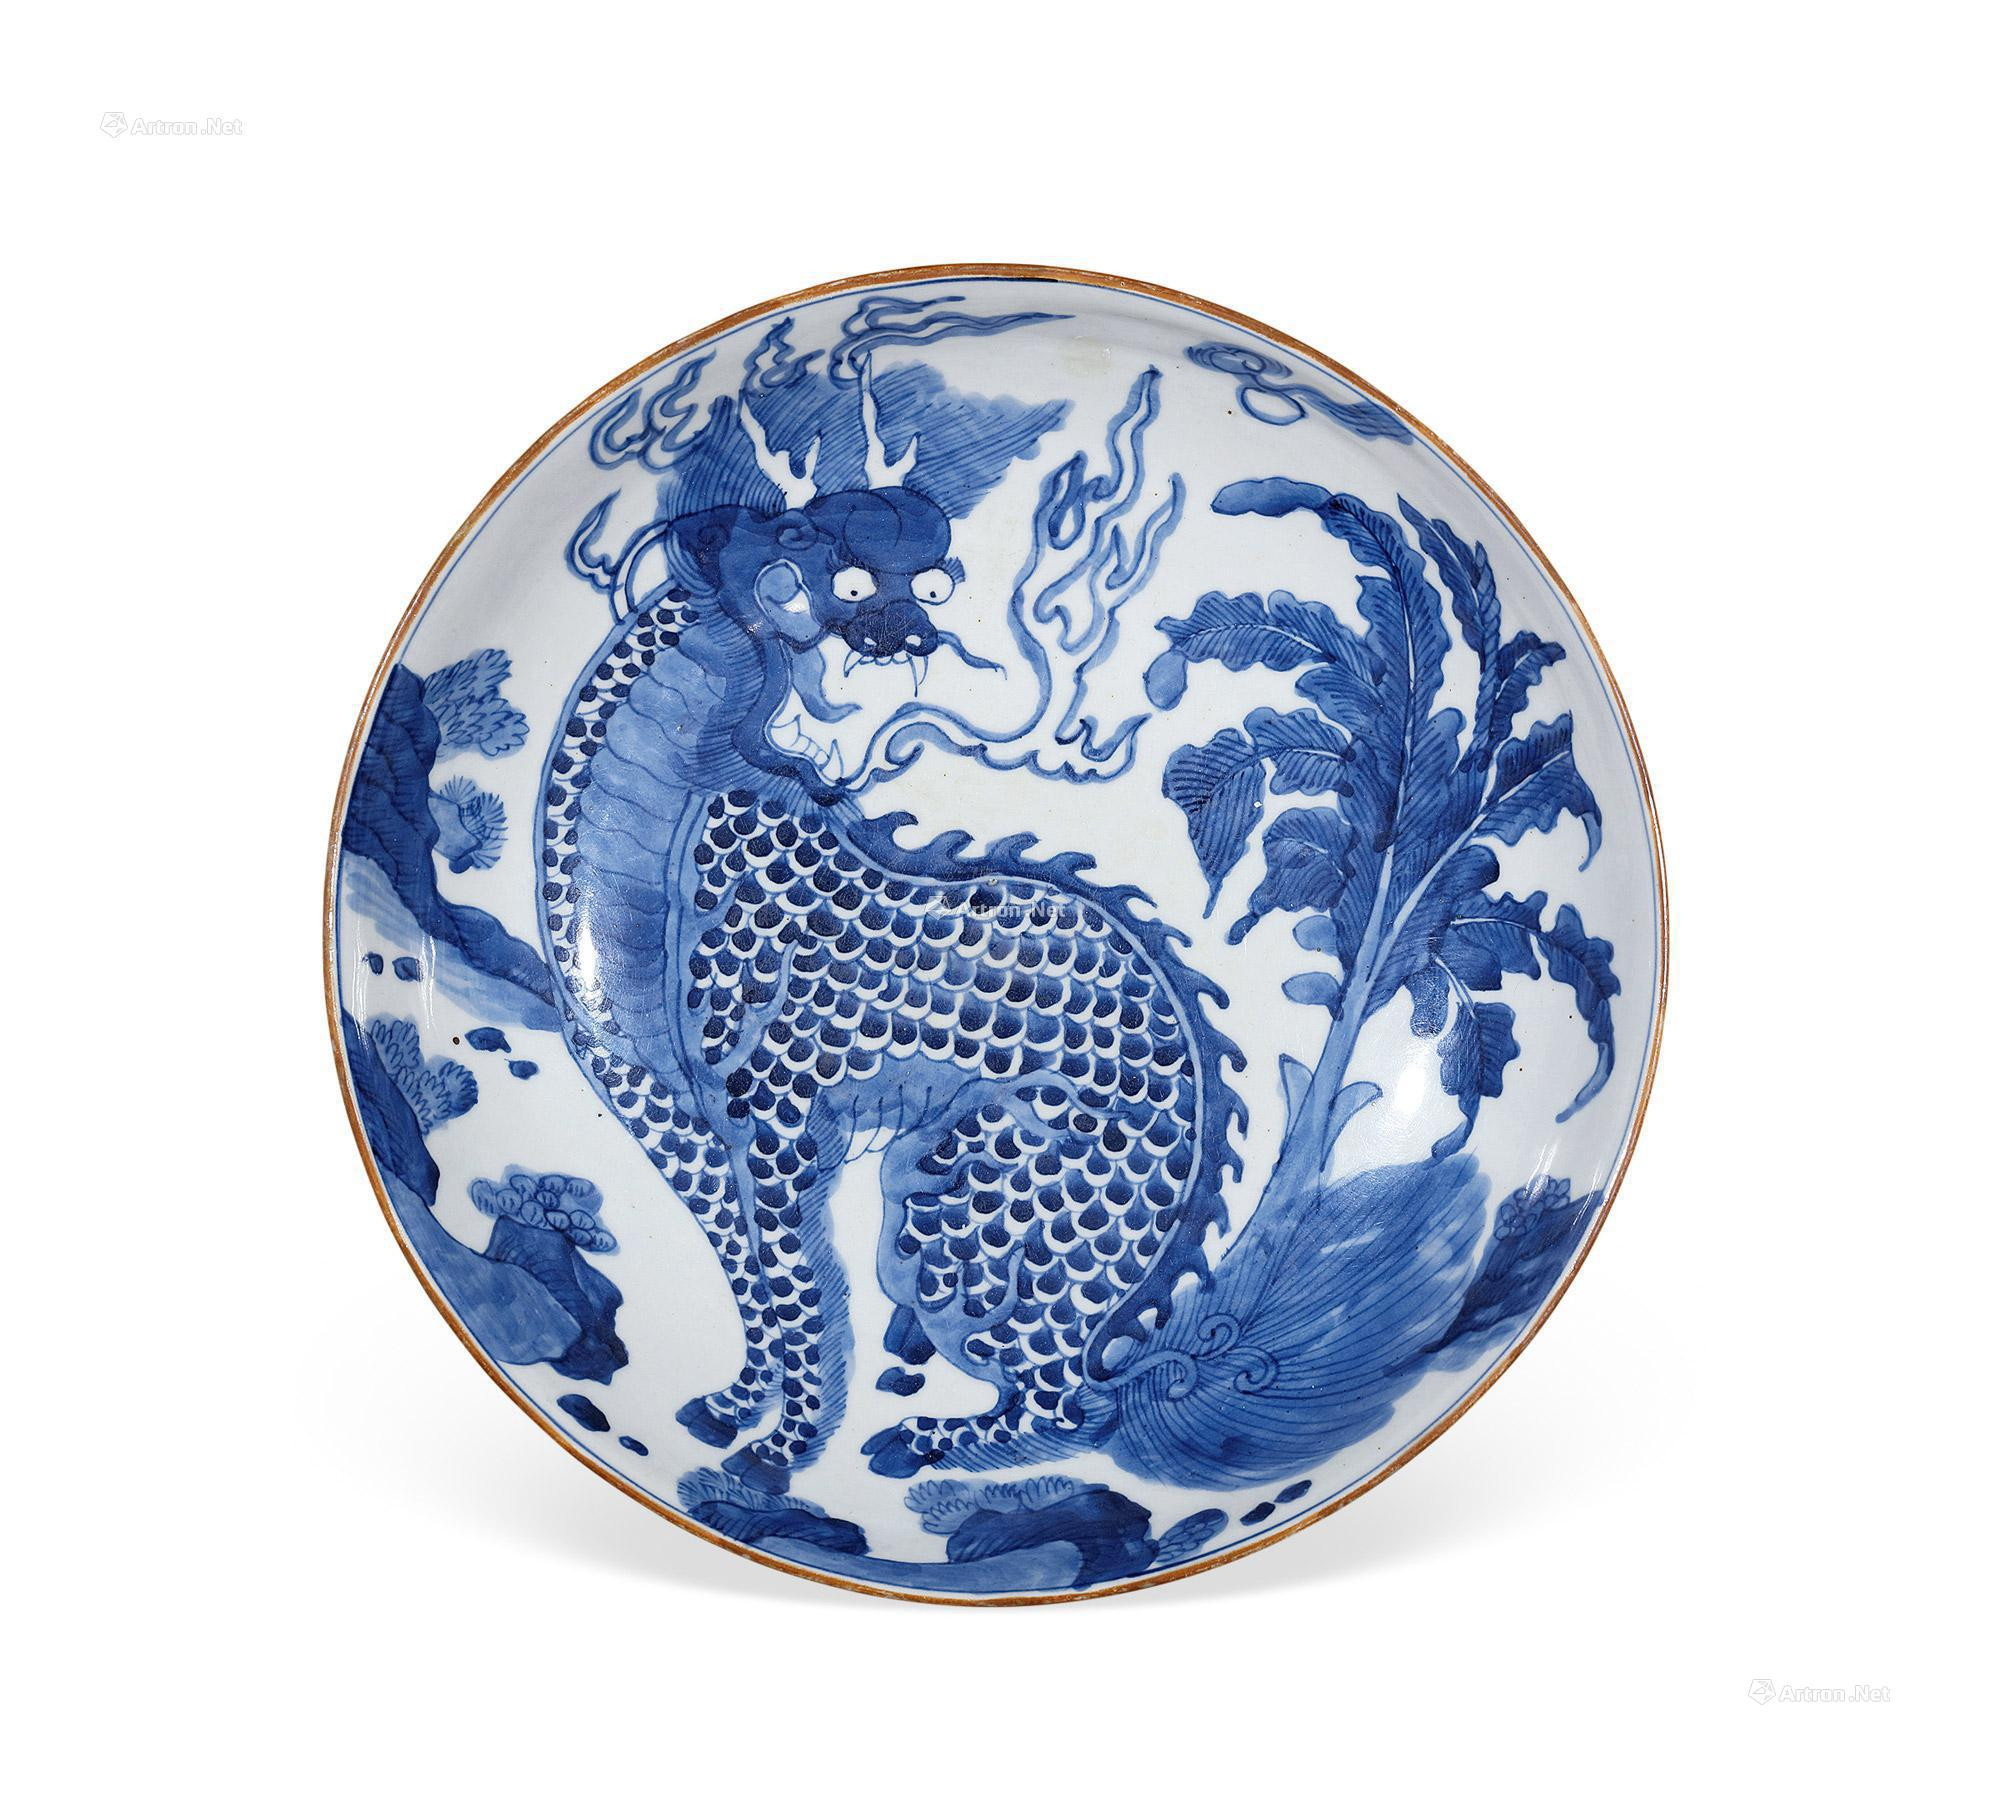 A BLUE AND WHITE MYSTICAL BEAST PLATE